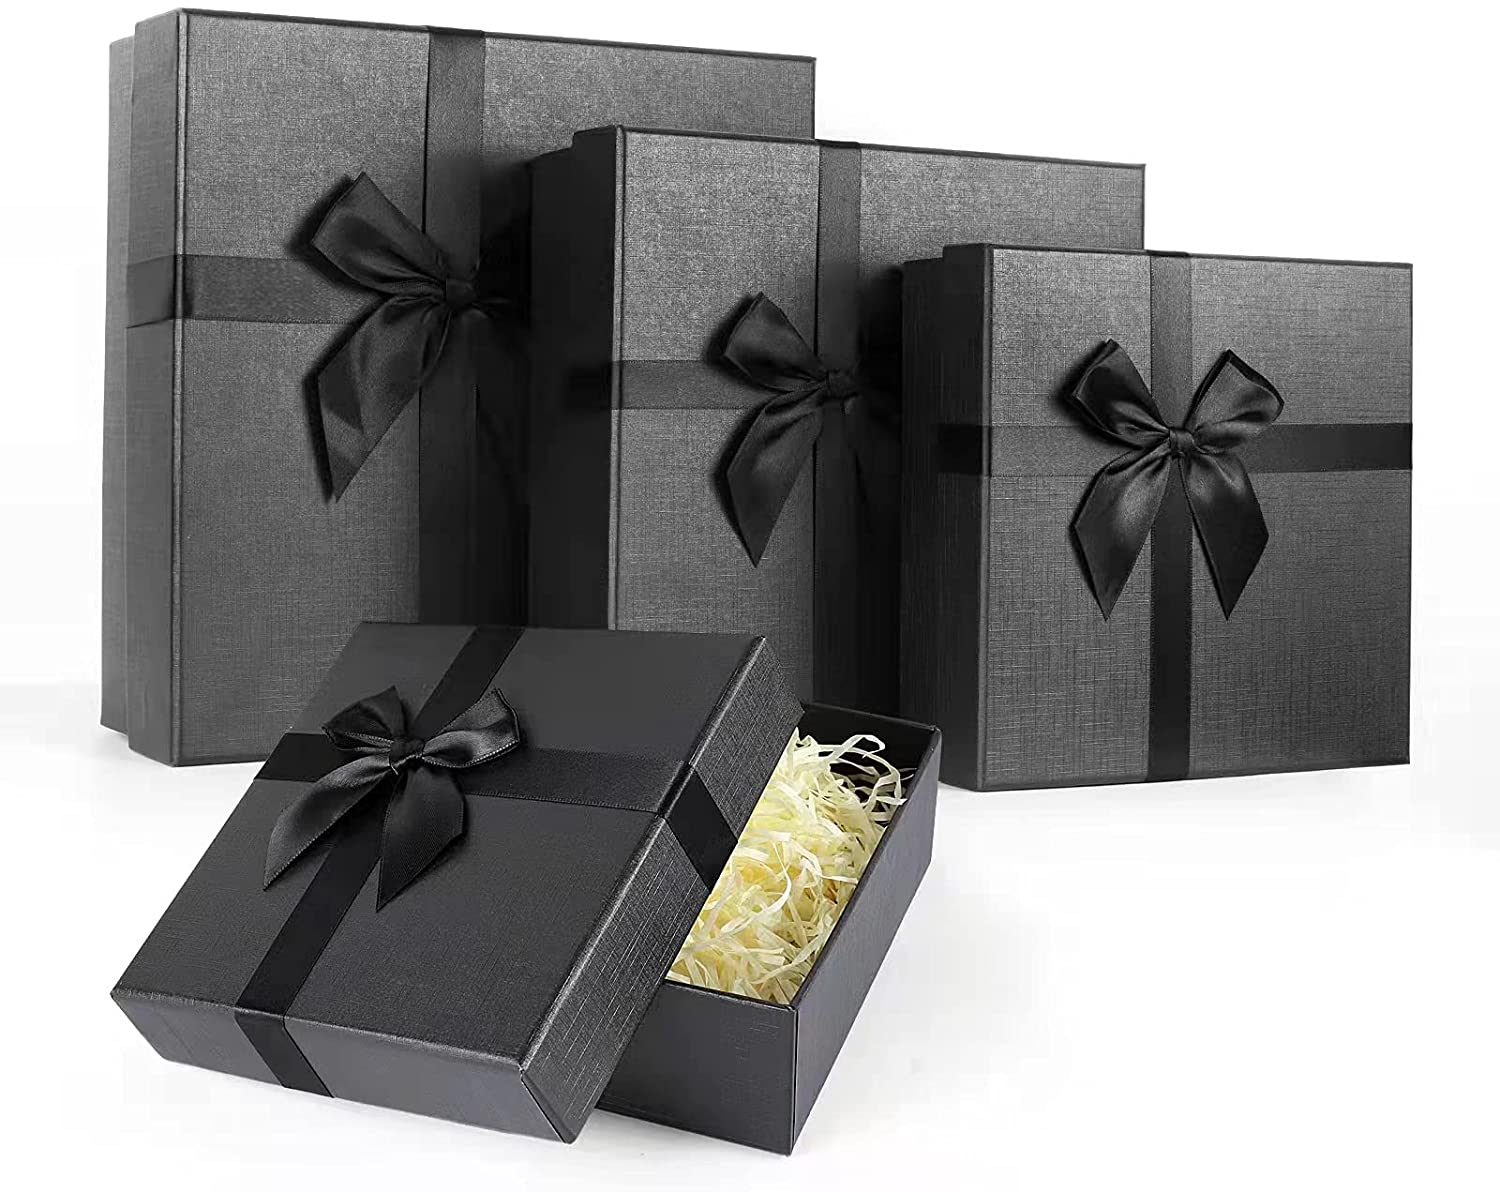 Reusing Luxury Gift Boxes Instead Of Just Throwing Them Away & Not Recycling